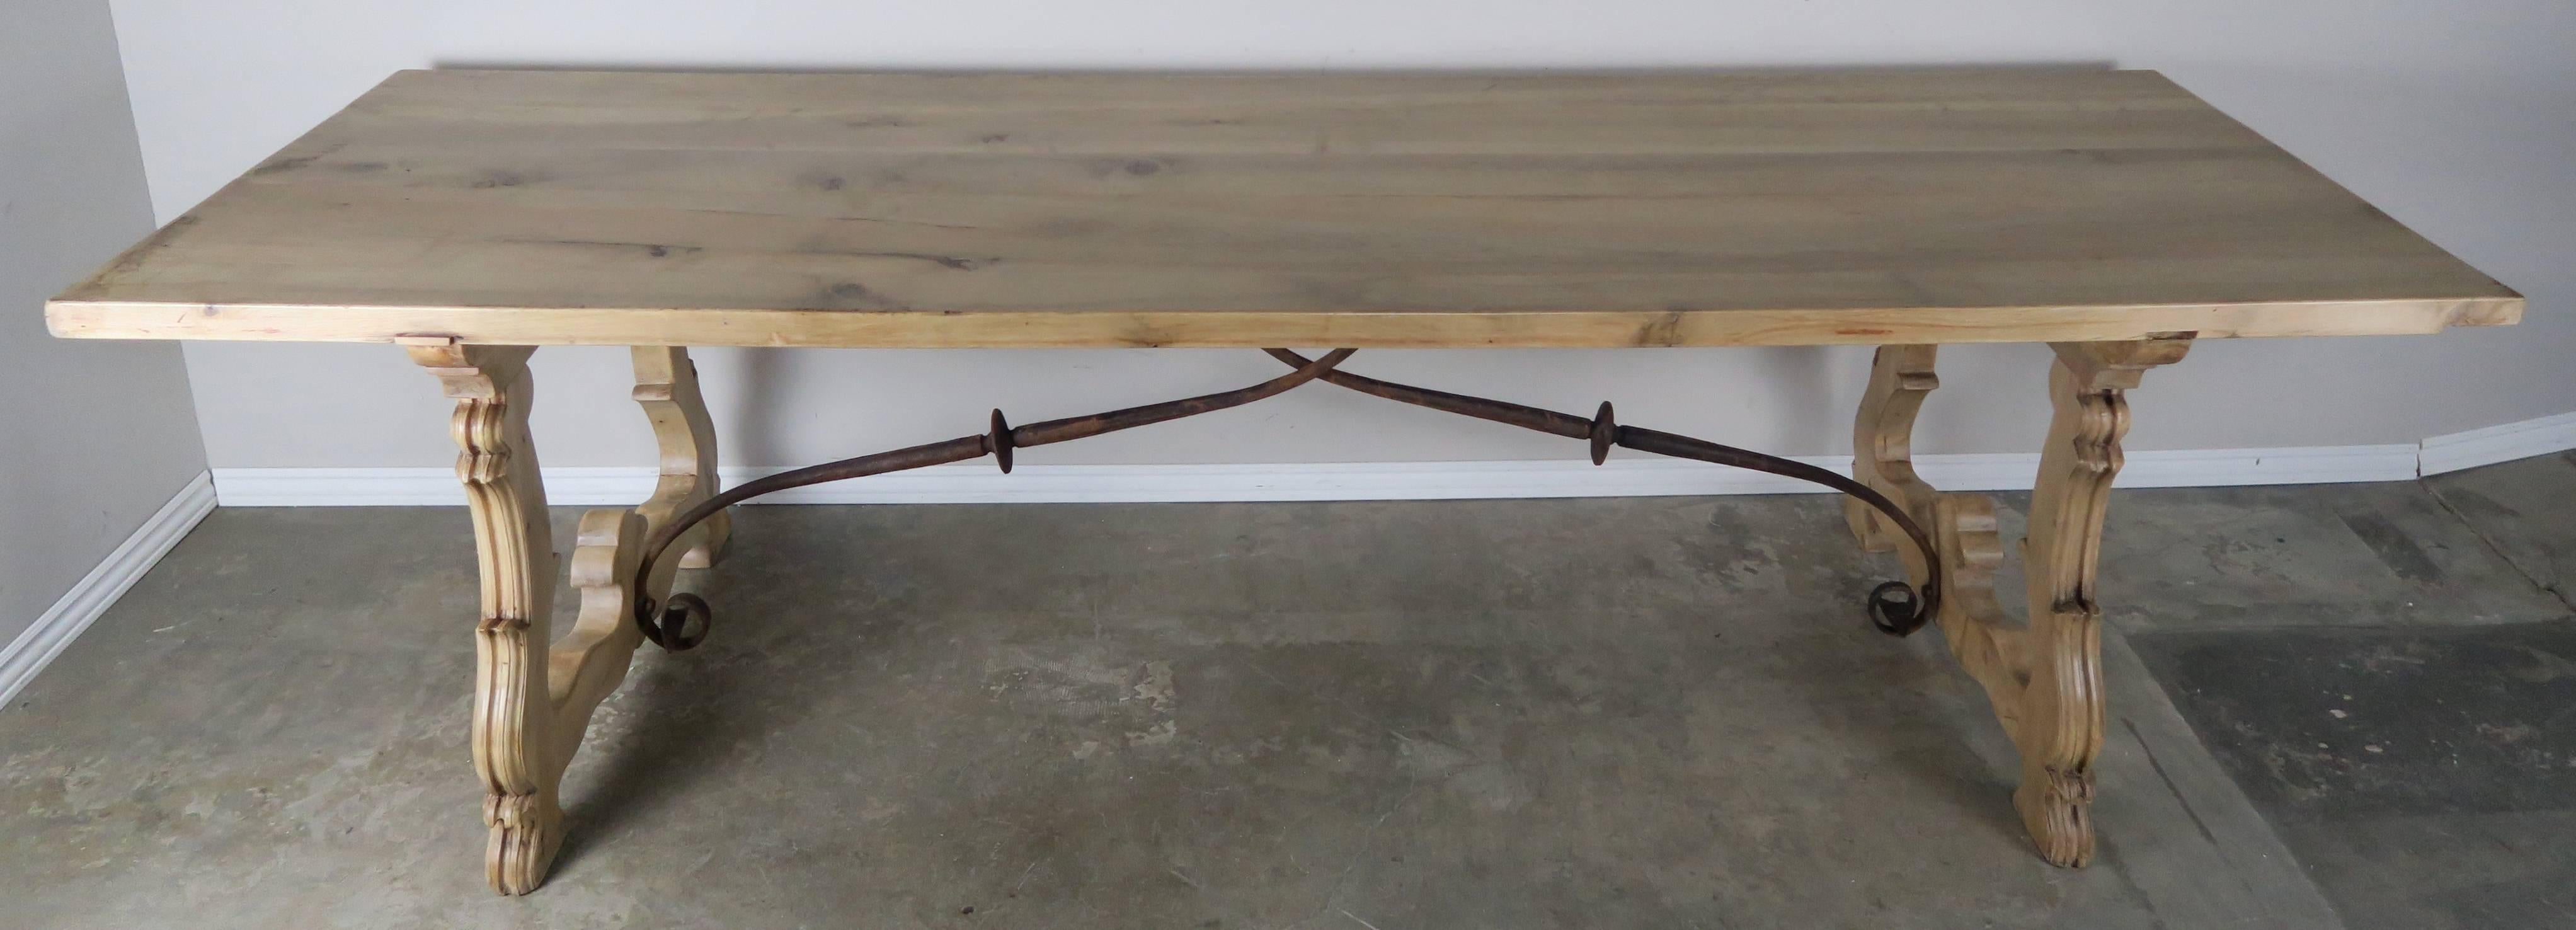 We are offering this Spanish Baroque style walnut refectory table with lyre or harp form supports and original iron stretchers. A refectory table is a long narrow table supported by heavy legs or trestles connected by stretchers, used originally for